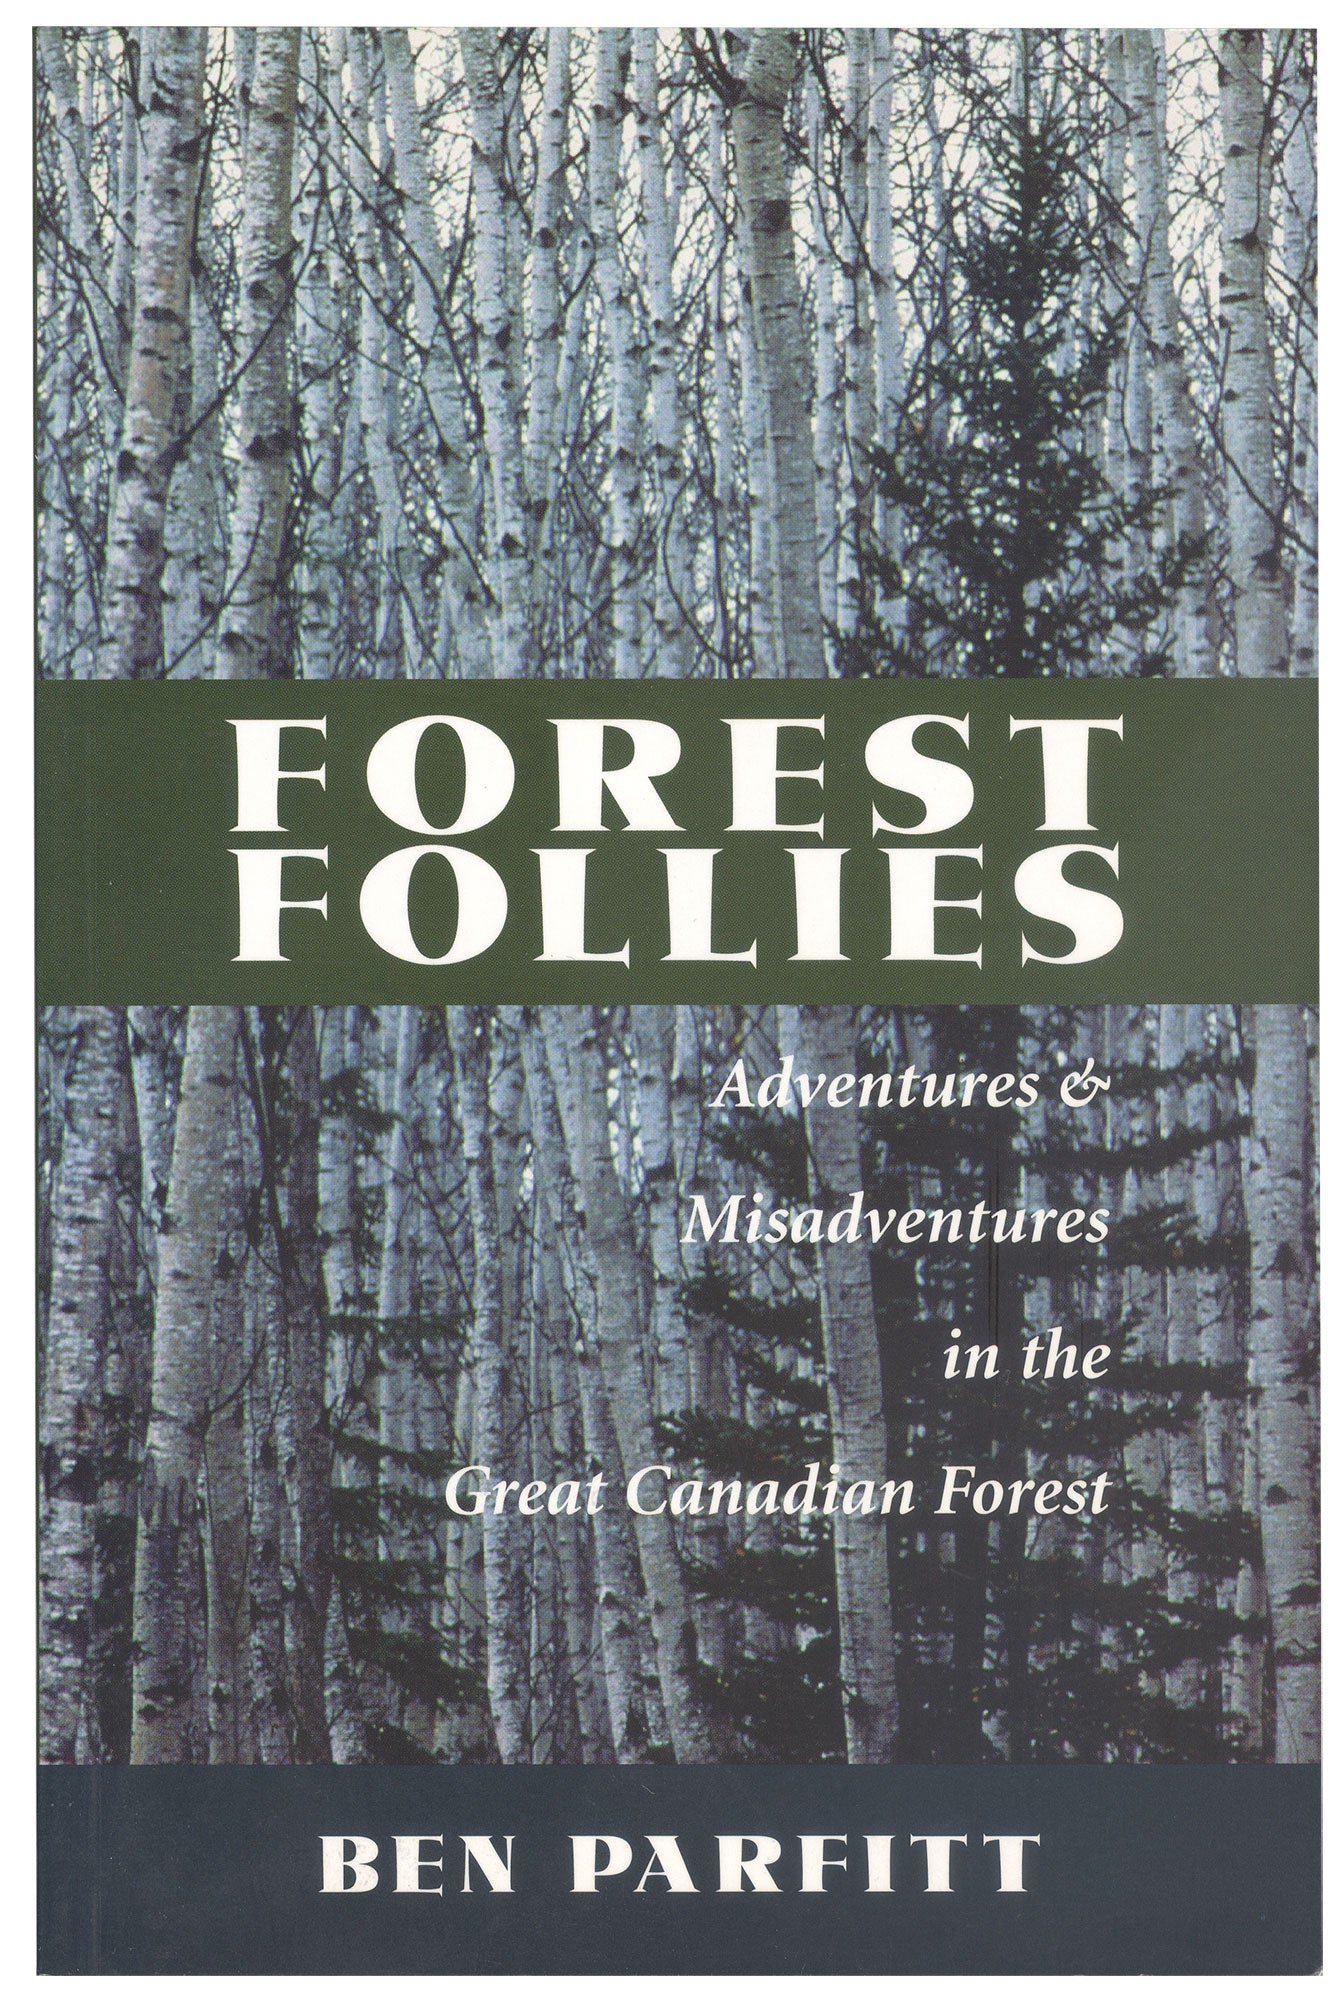 Book cover with images of a forest. Text on the image says "Forest Follies. Adventures and misadventures in the great Canadian forest. Ben Parfitt." End of image description. 